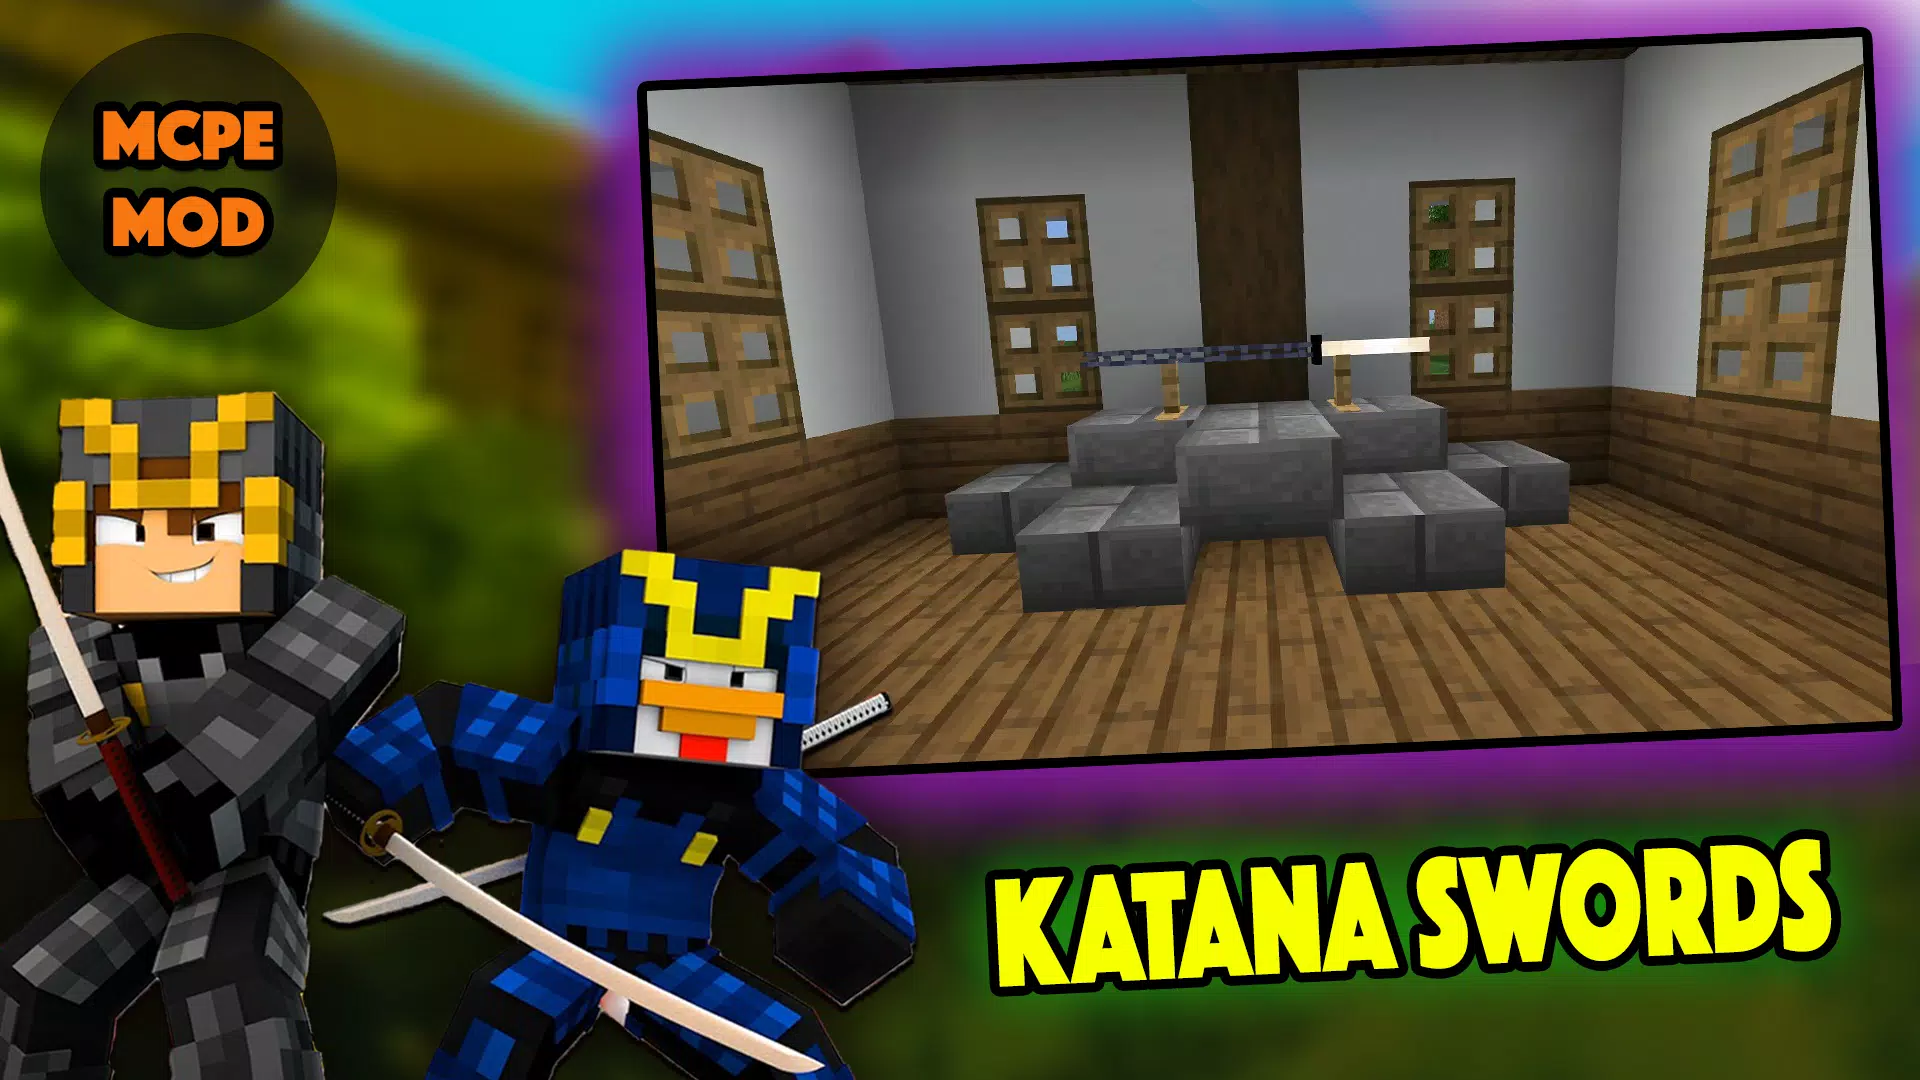 Download Anime Sword Mod for Minecraft android on PC